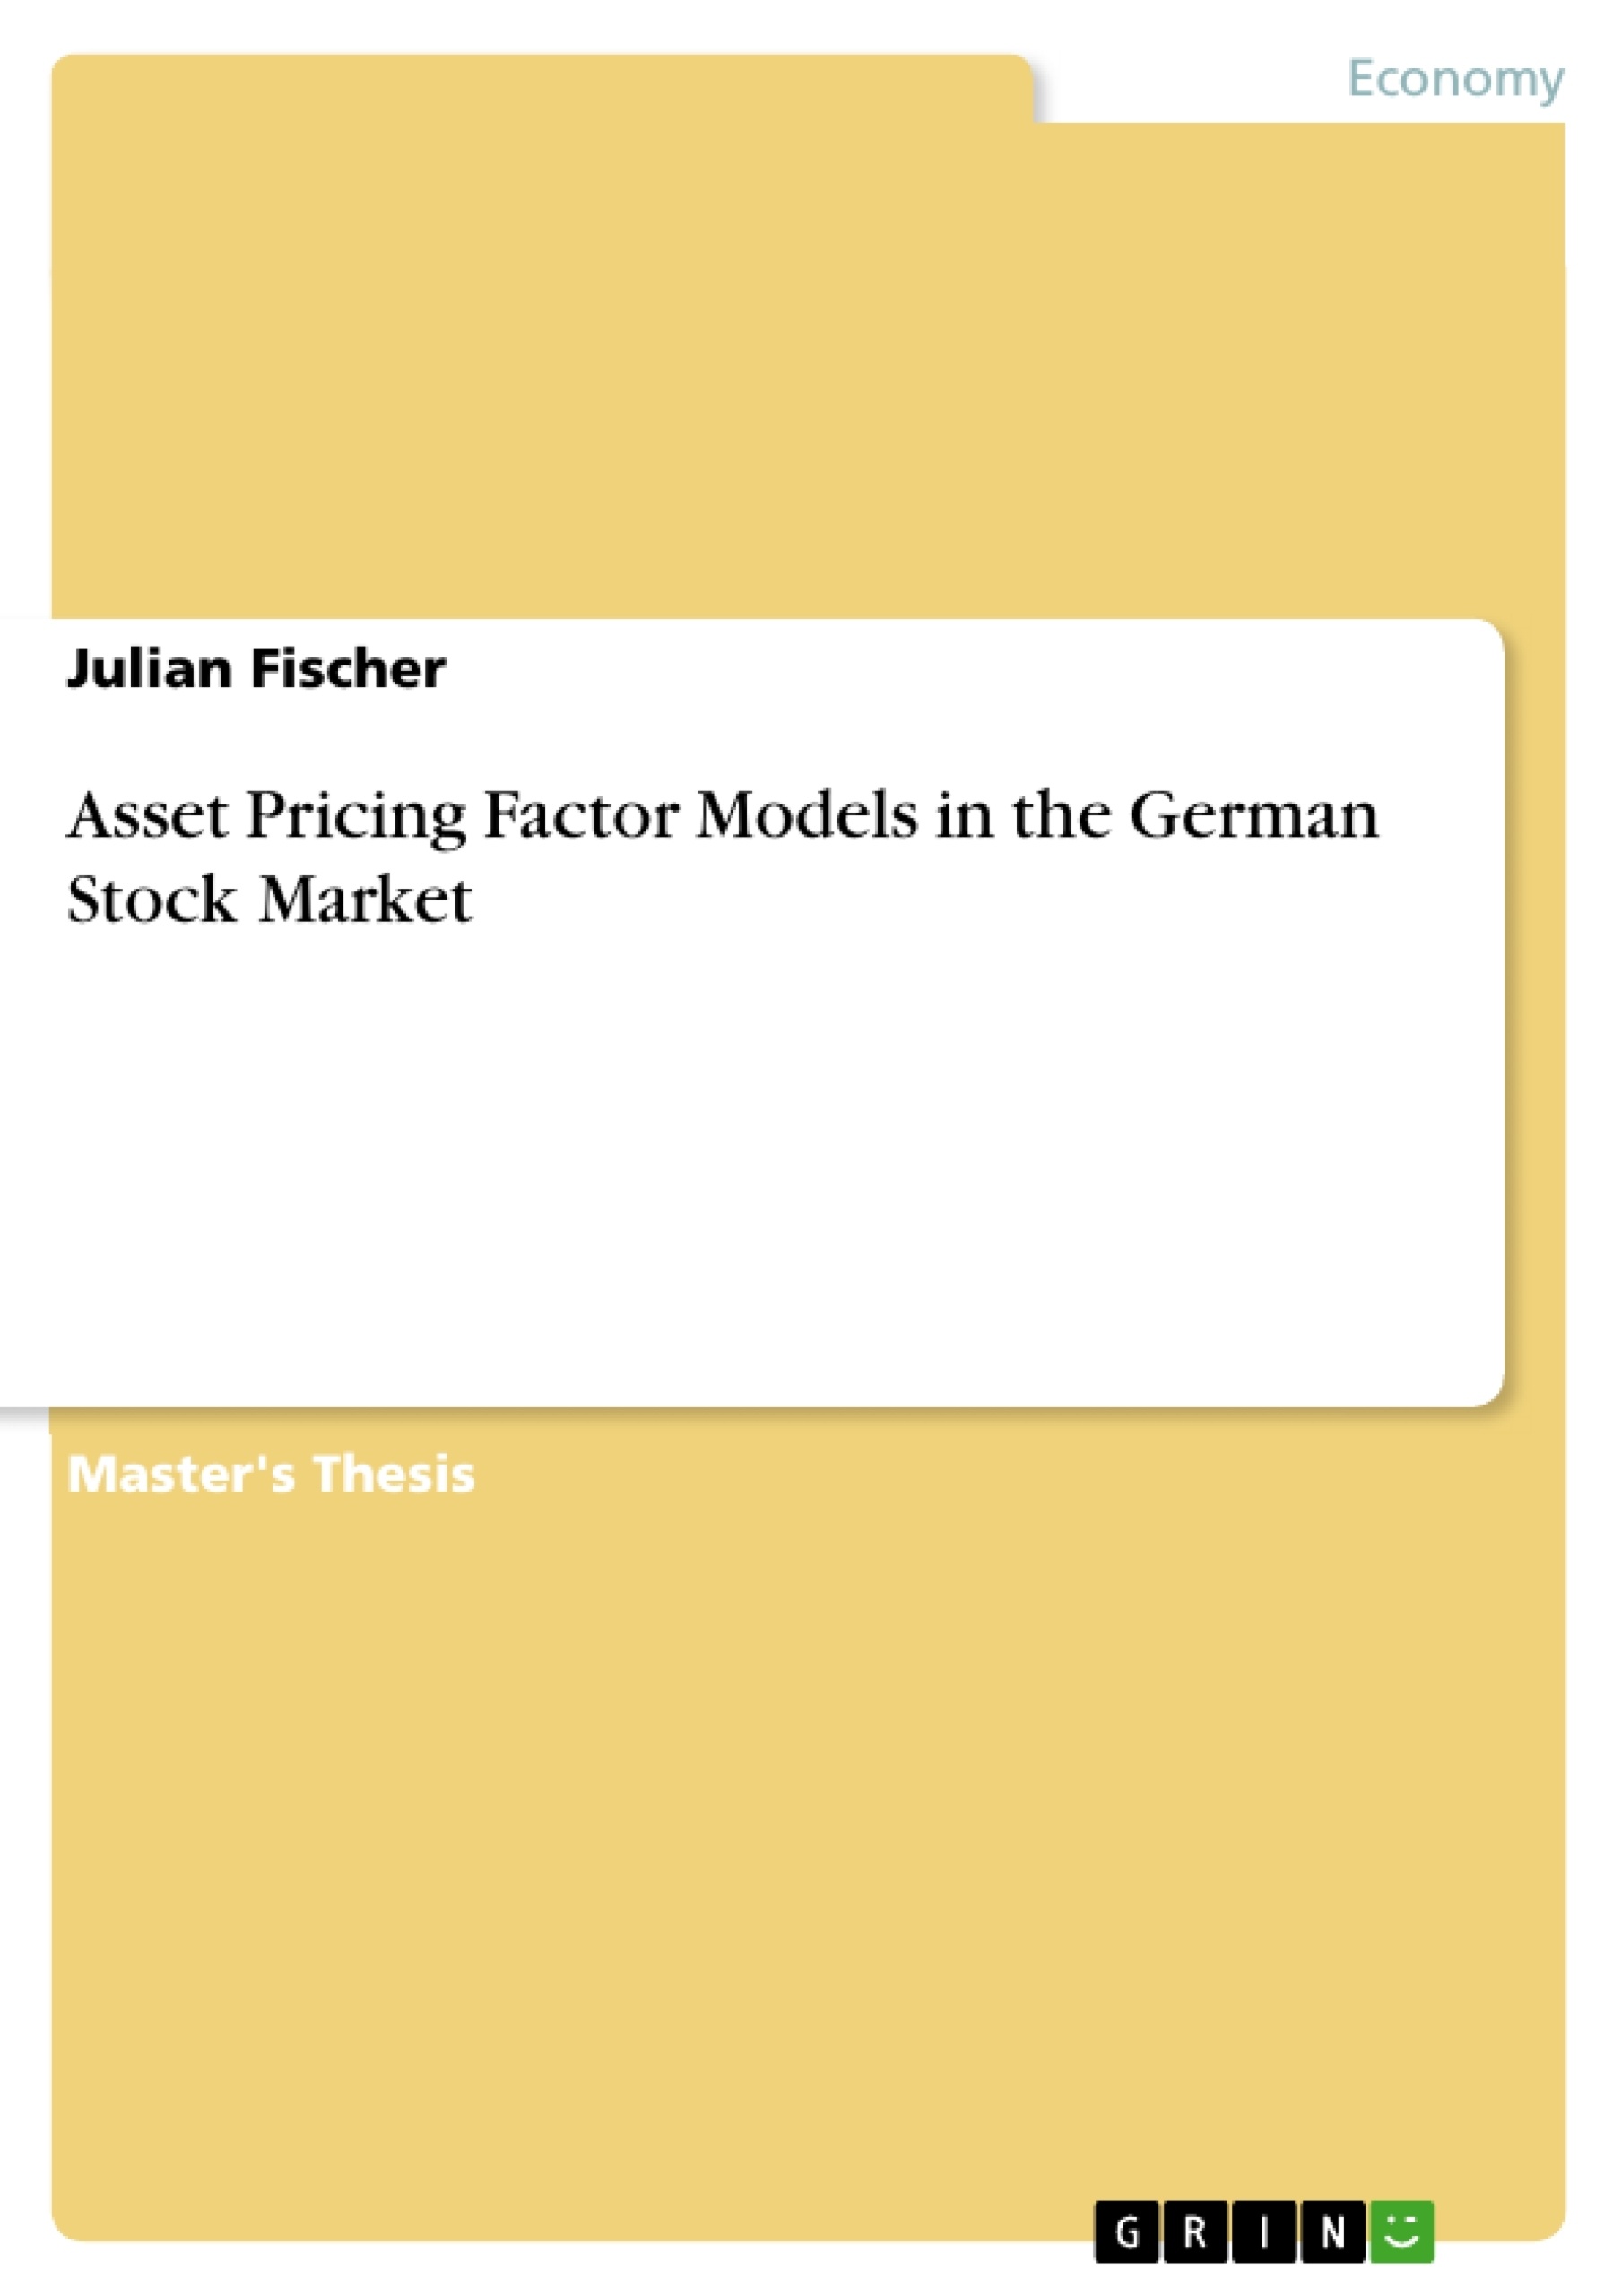 Title: Asset Pricing Factor Models in the German Stock Market